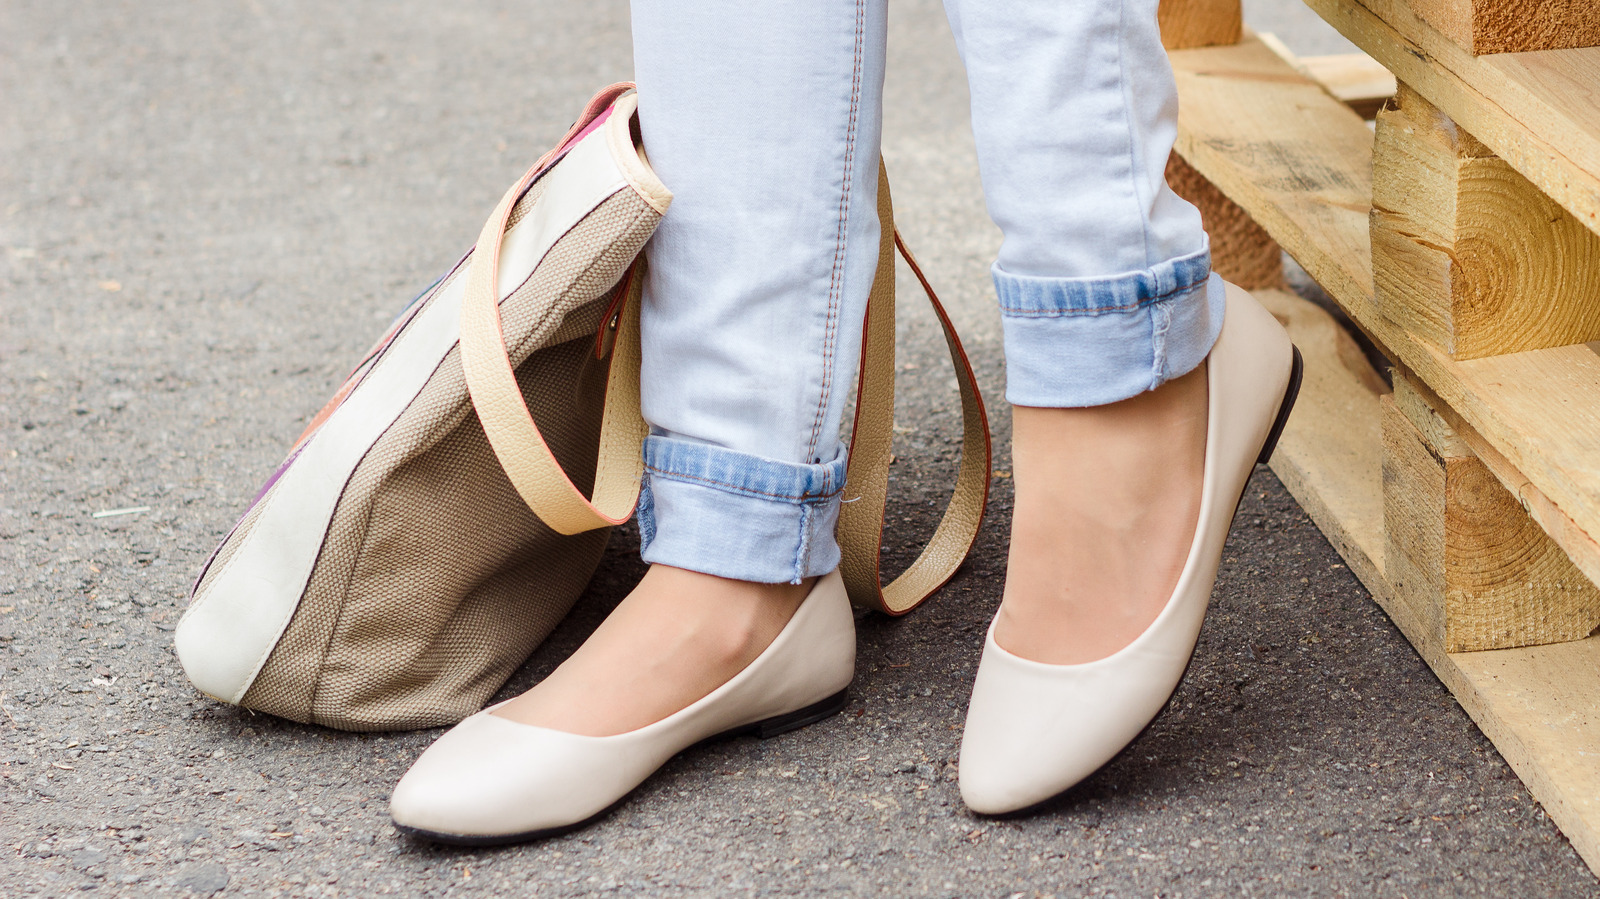 The Unfortunate Truth About Beloved Ballet Flats